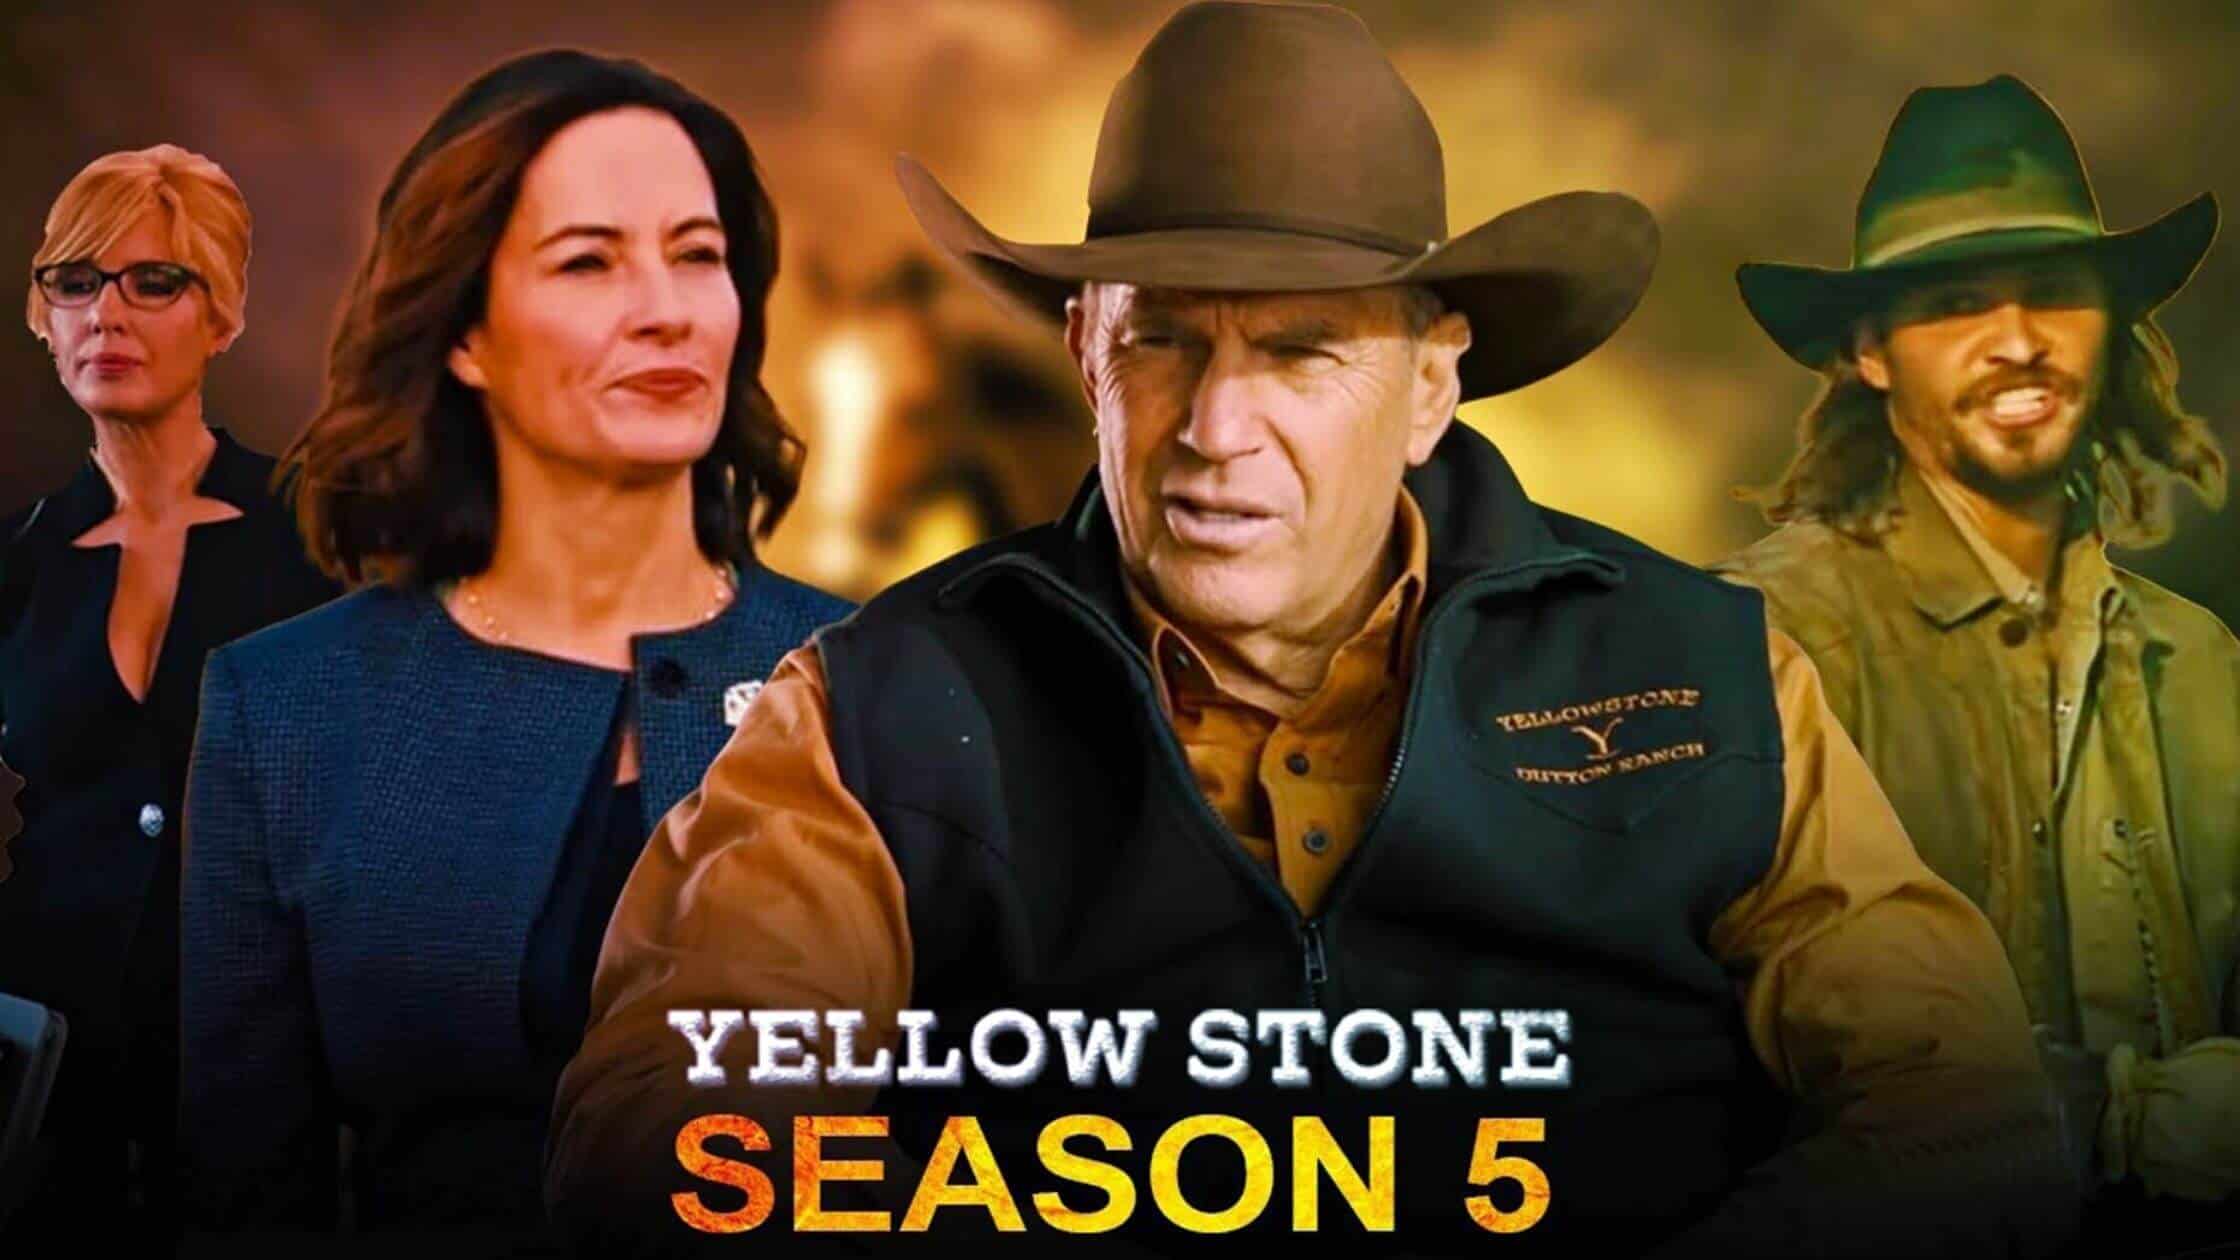 Yellowstone's Season 5 It's Coming Soon- Release Date, Cast, Plot, Highlights